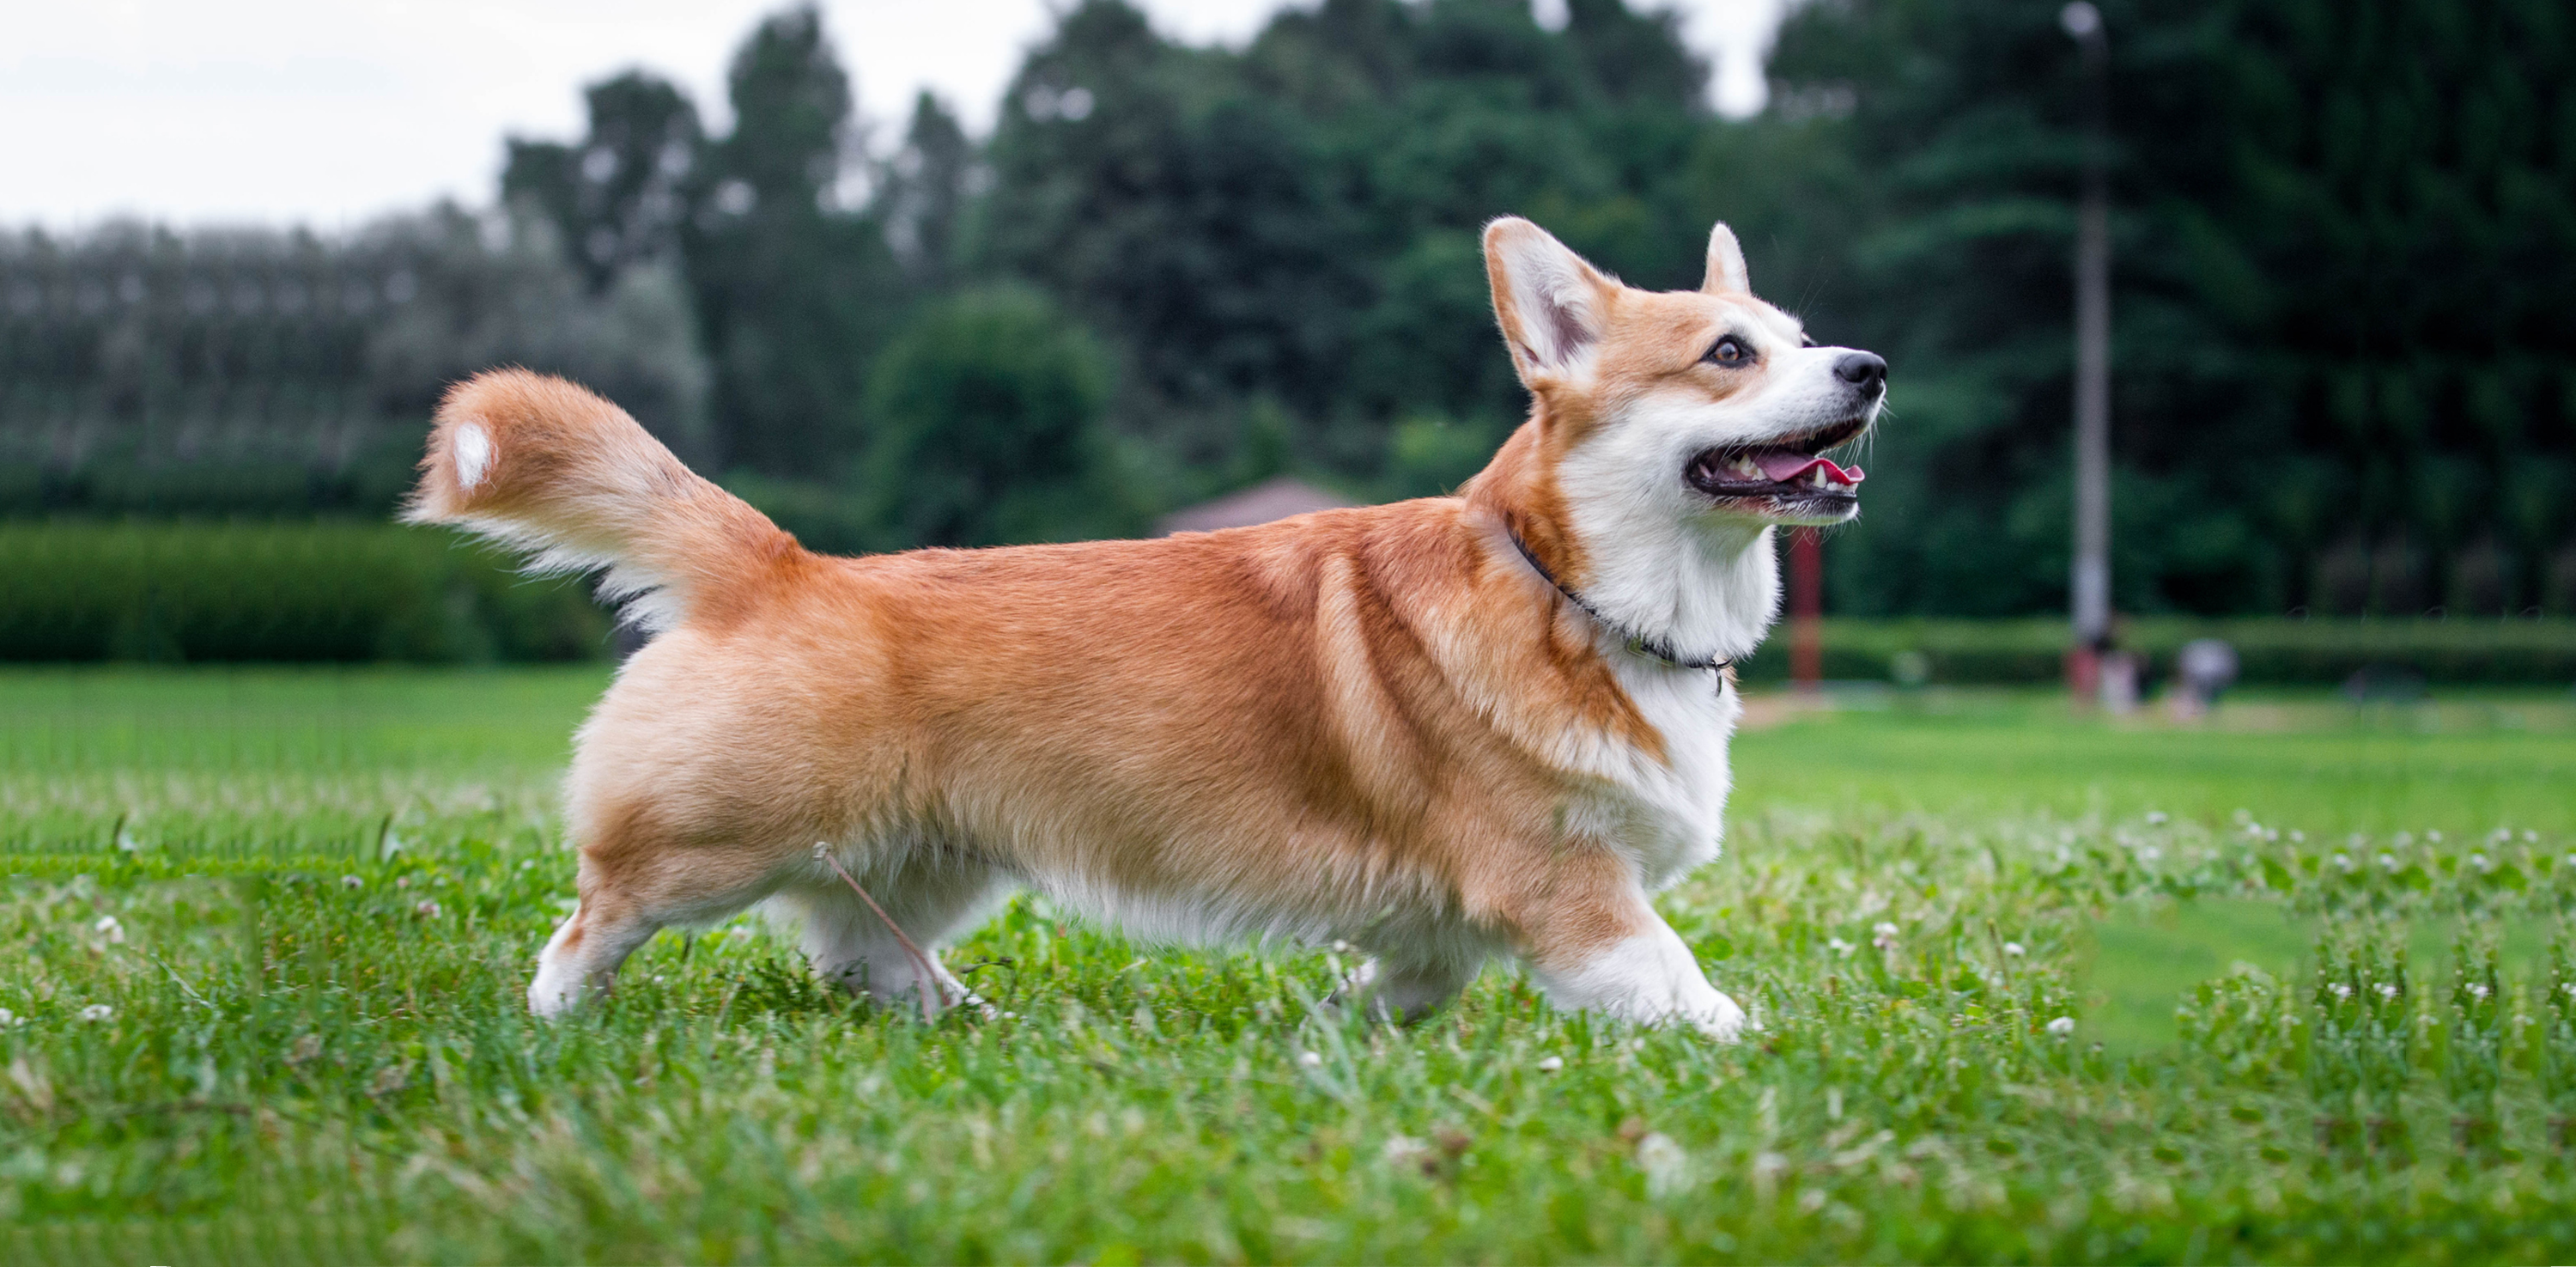 Pembroke Welsh Corgi Facts: 8 Things to Know About This Herding Breed